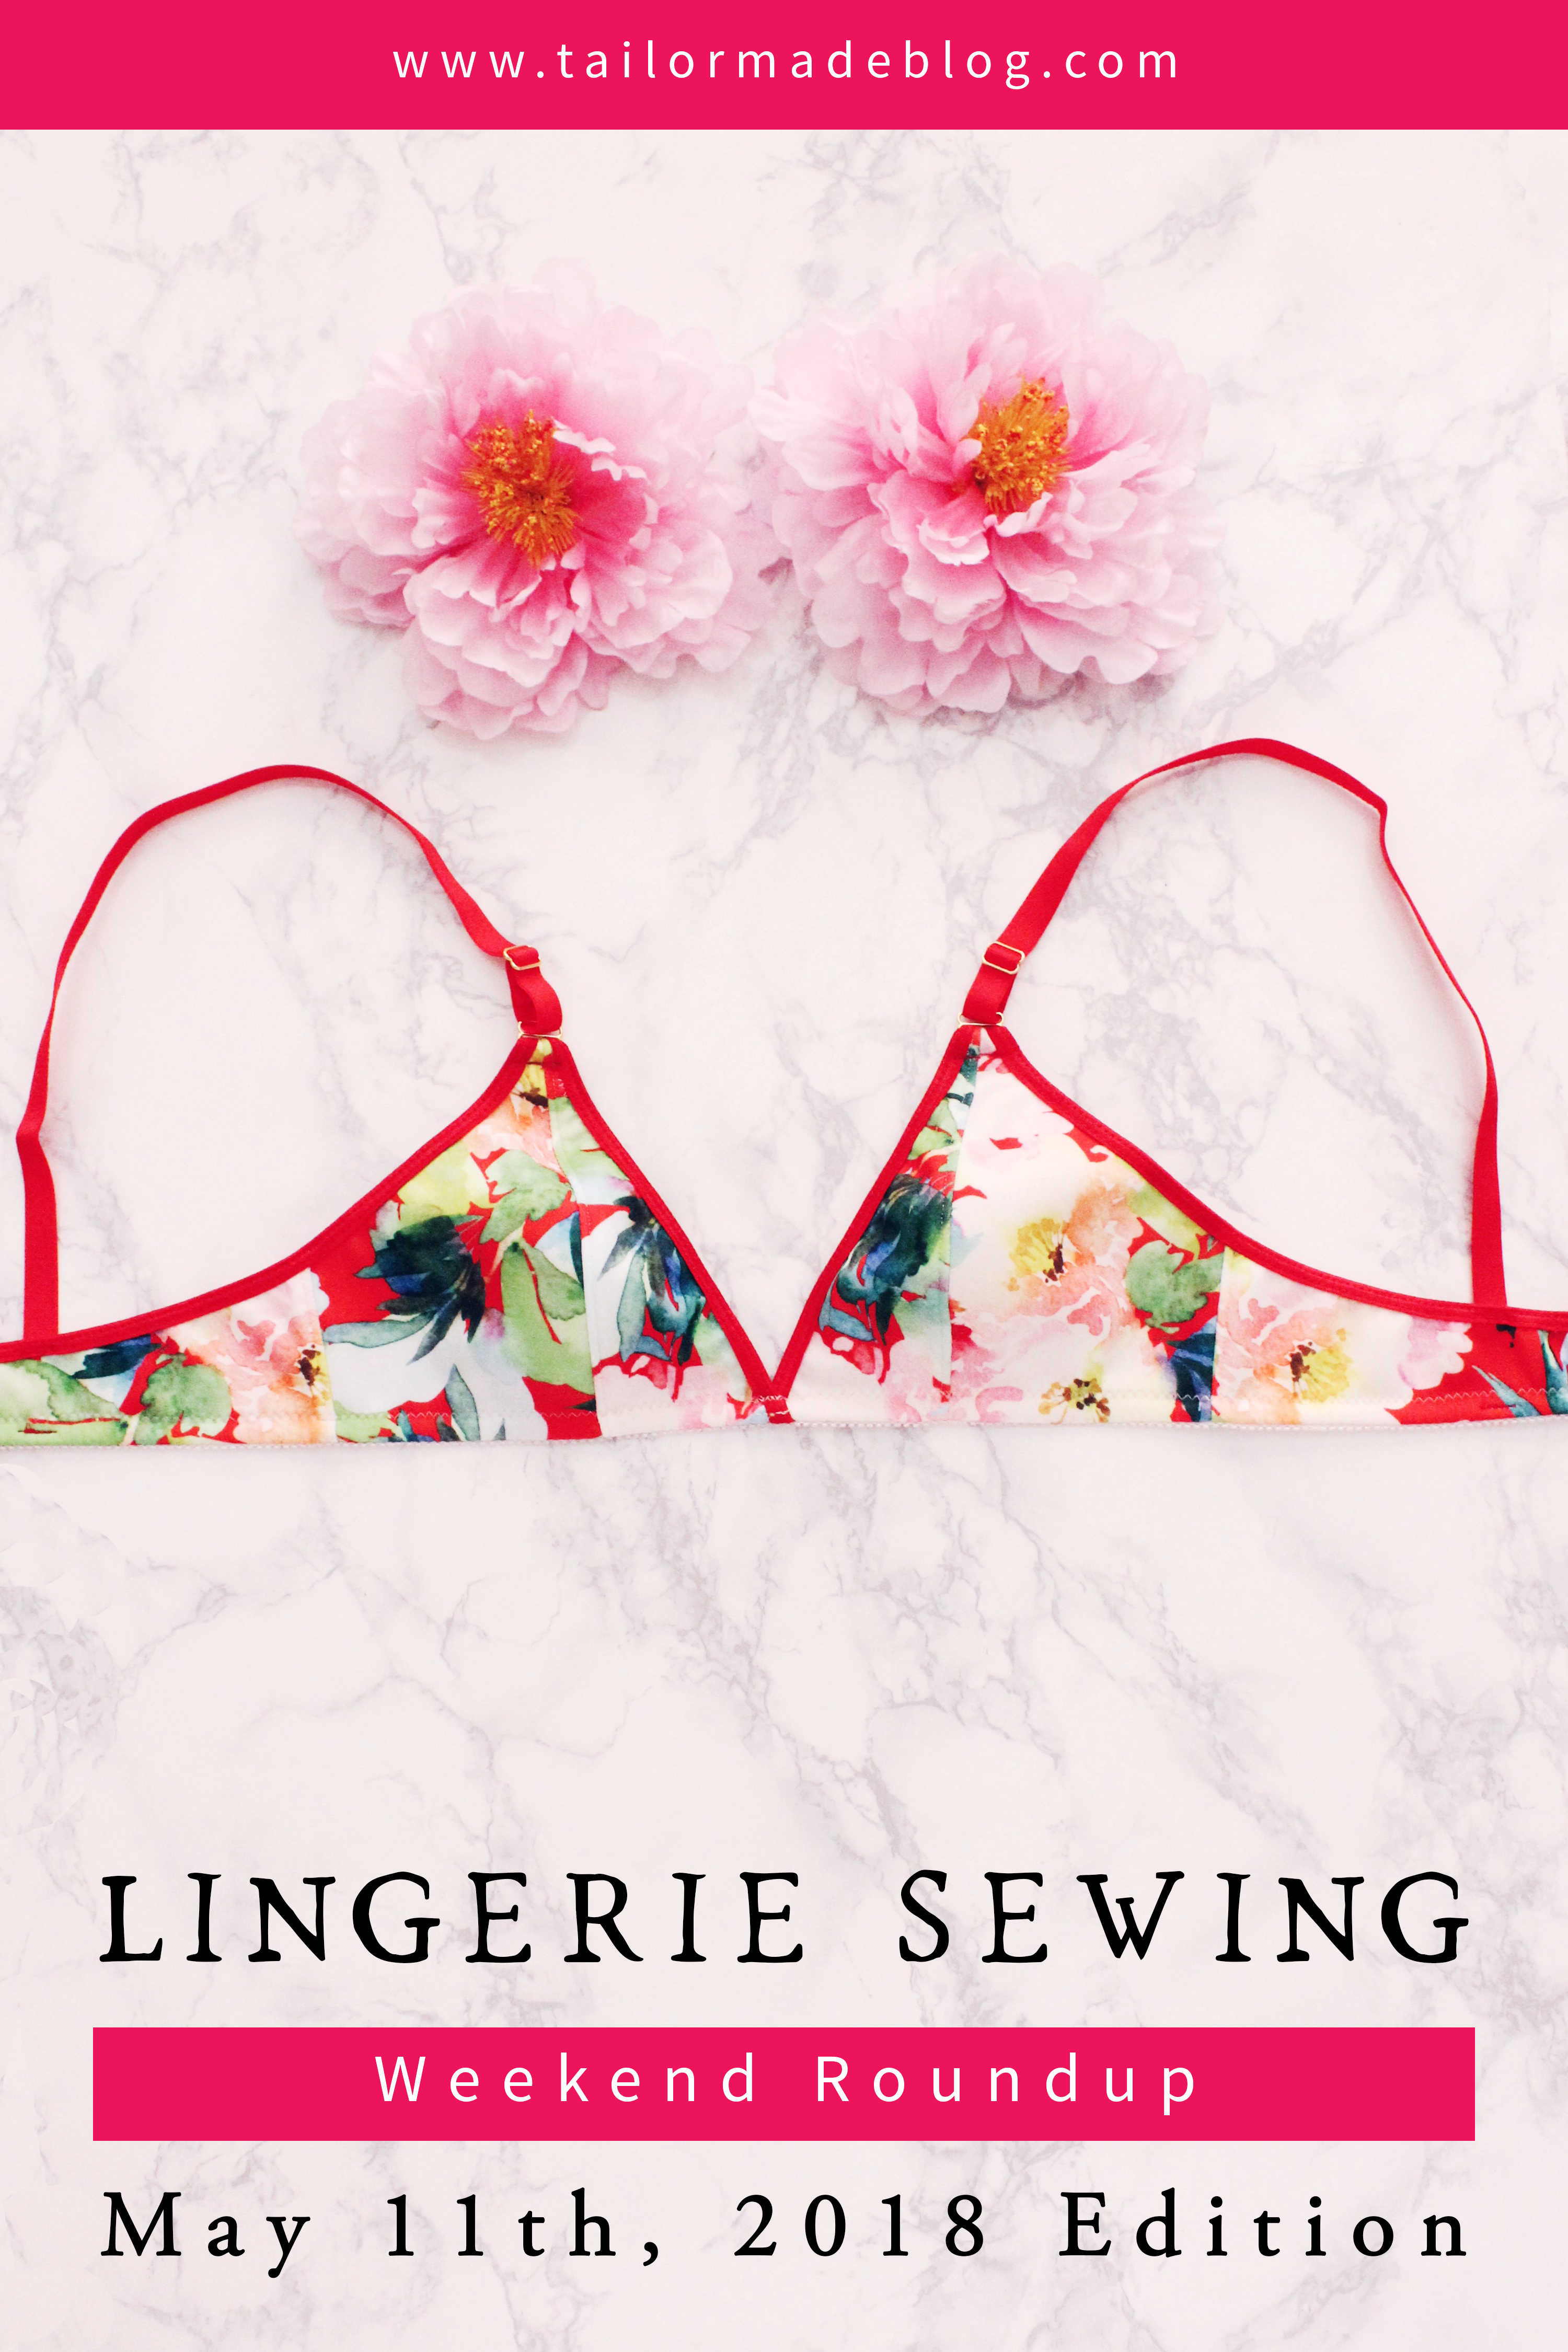 May 11th, 2018 Lingerie Sewing Weekend Round Up Latest news and makes and sewing projects from the lingerie sewing bra making community